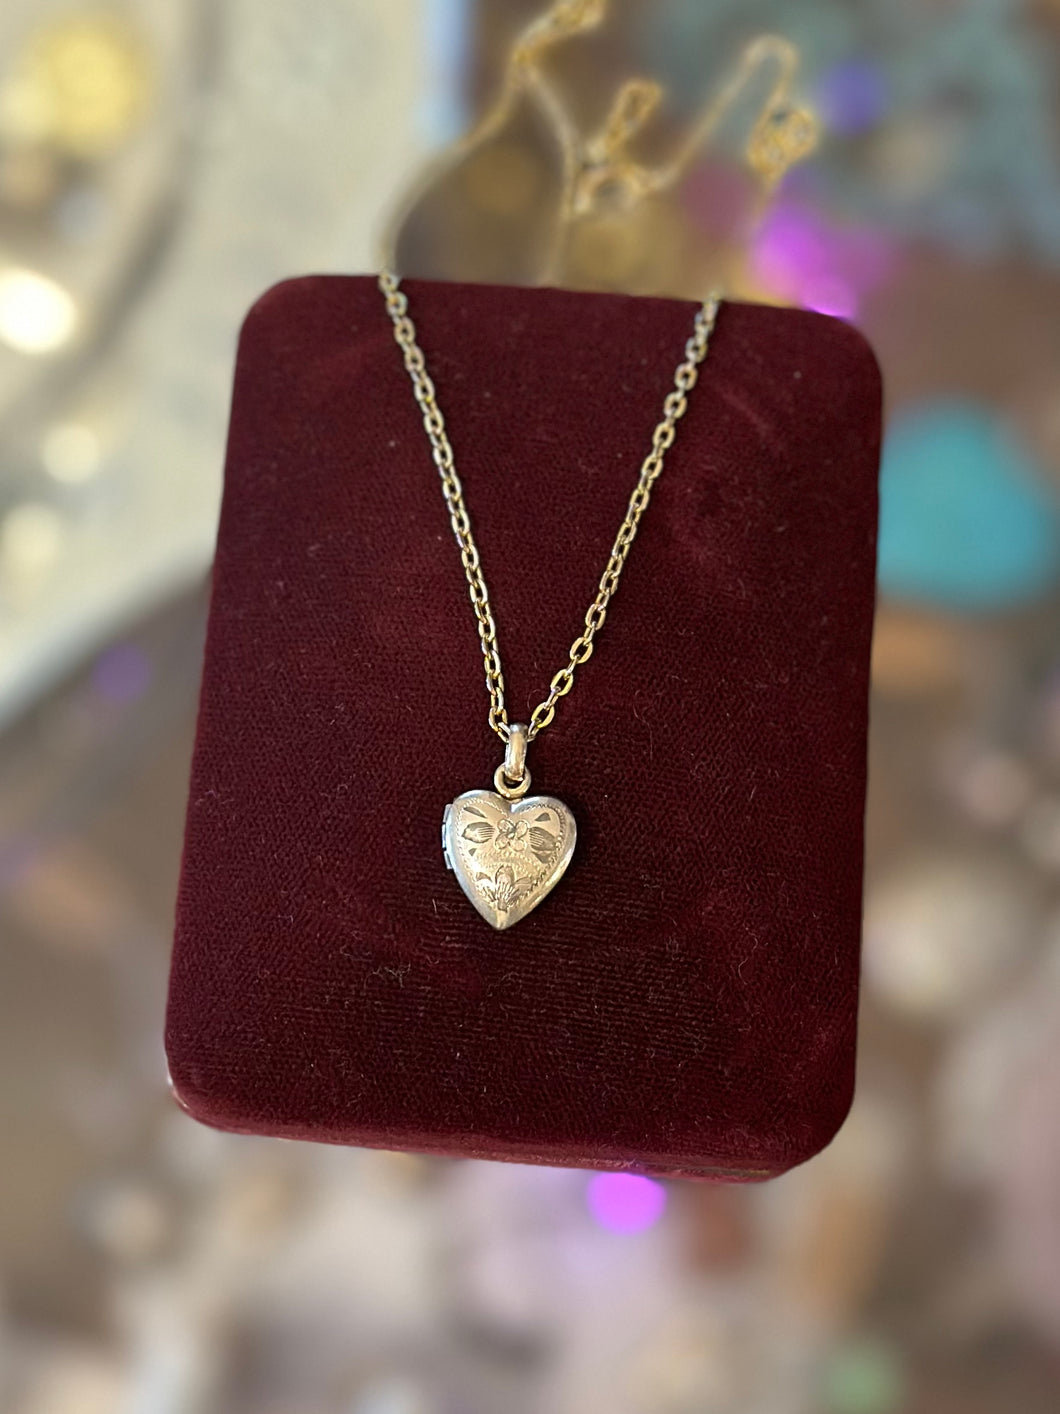 Vintage 1/20 12k Gold over Sterling Silver Dainty Etched Heart Locket Pendant on 1/20 14k GF Gold Filled Chain